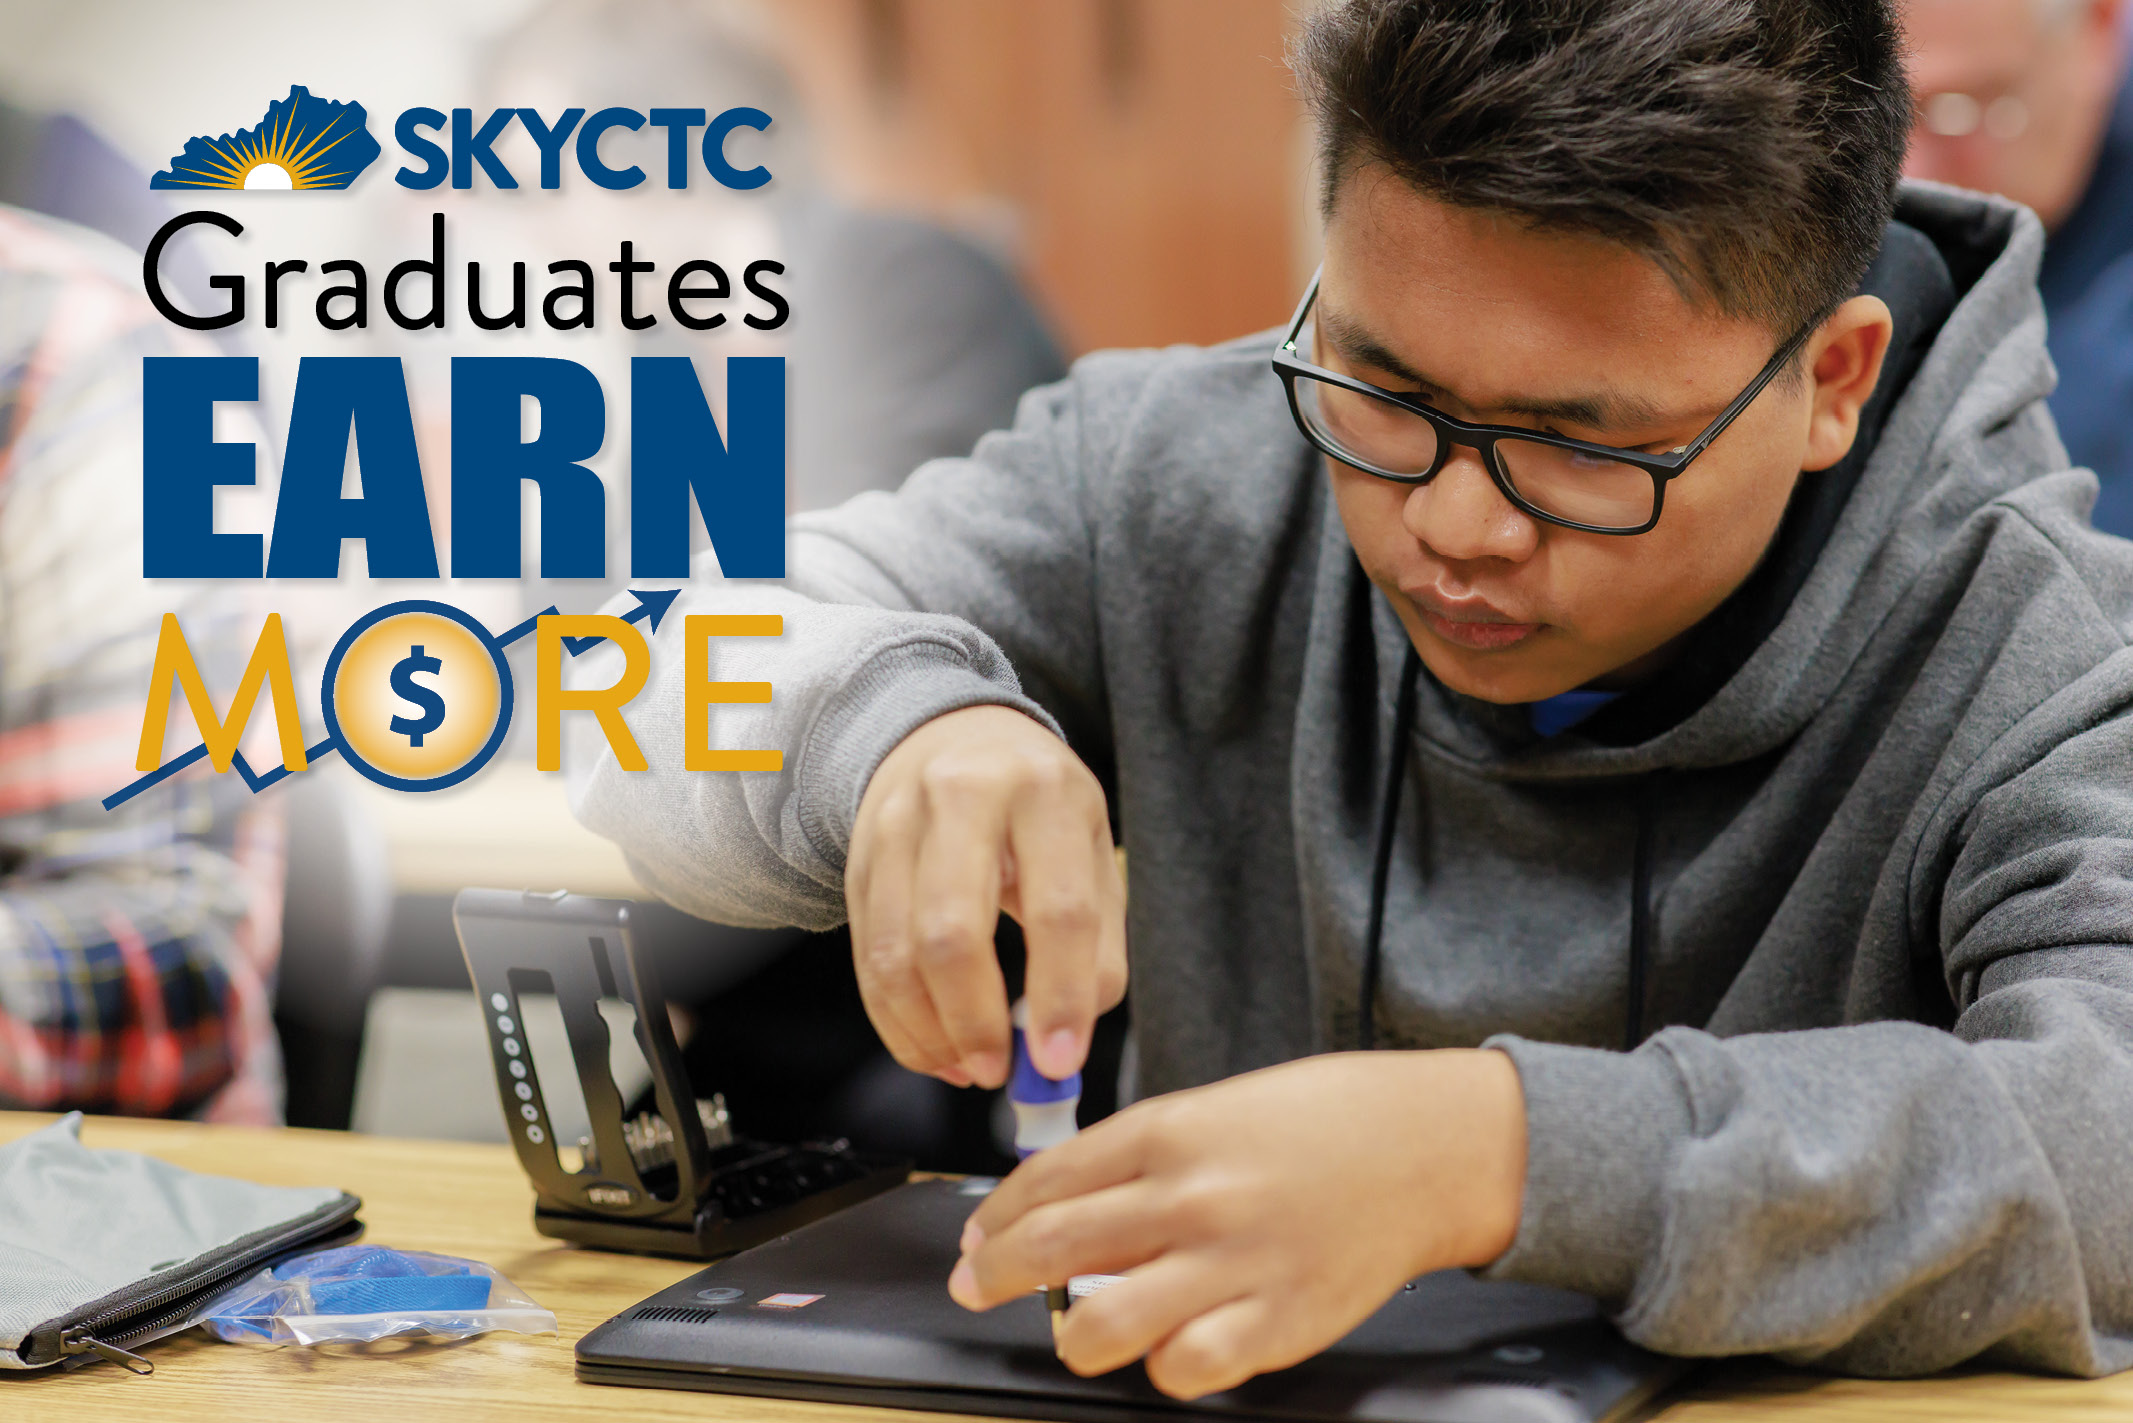 A guy working on computer motherboard. SKYCTC Graduates Earn More.